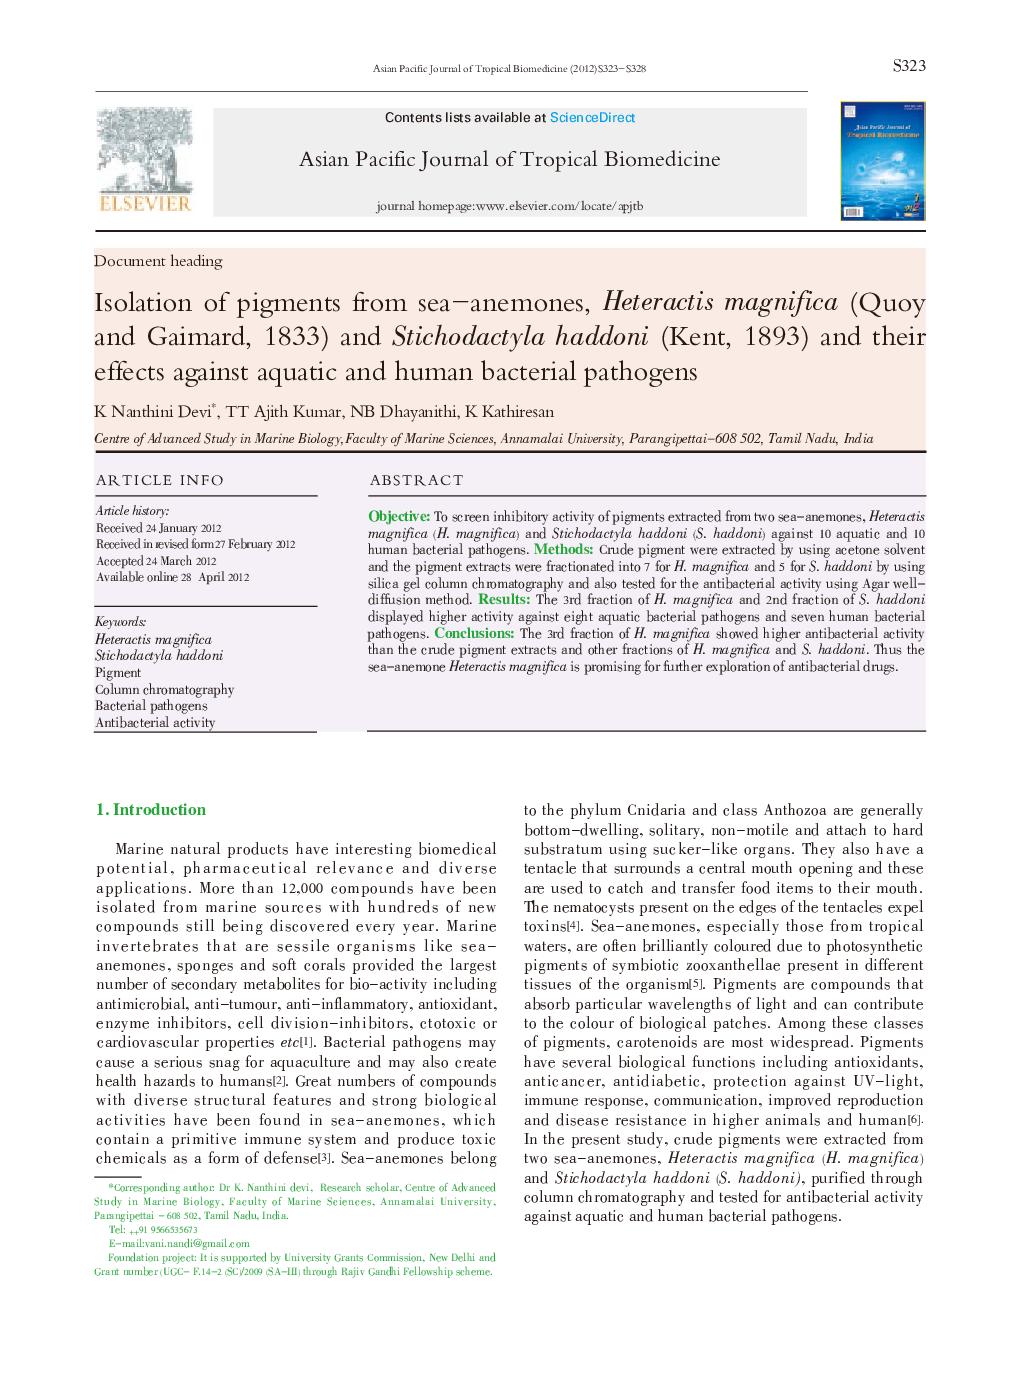 Isolation of pigments from sea-anemones, Heteractis magnifica (Quoy and Gaimard, 1833) and Stichodactyla haddoni (Kent, 1893) and their effects against aquatic and human bacterial pathogens